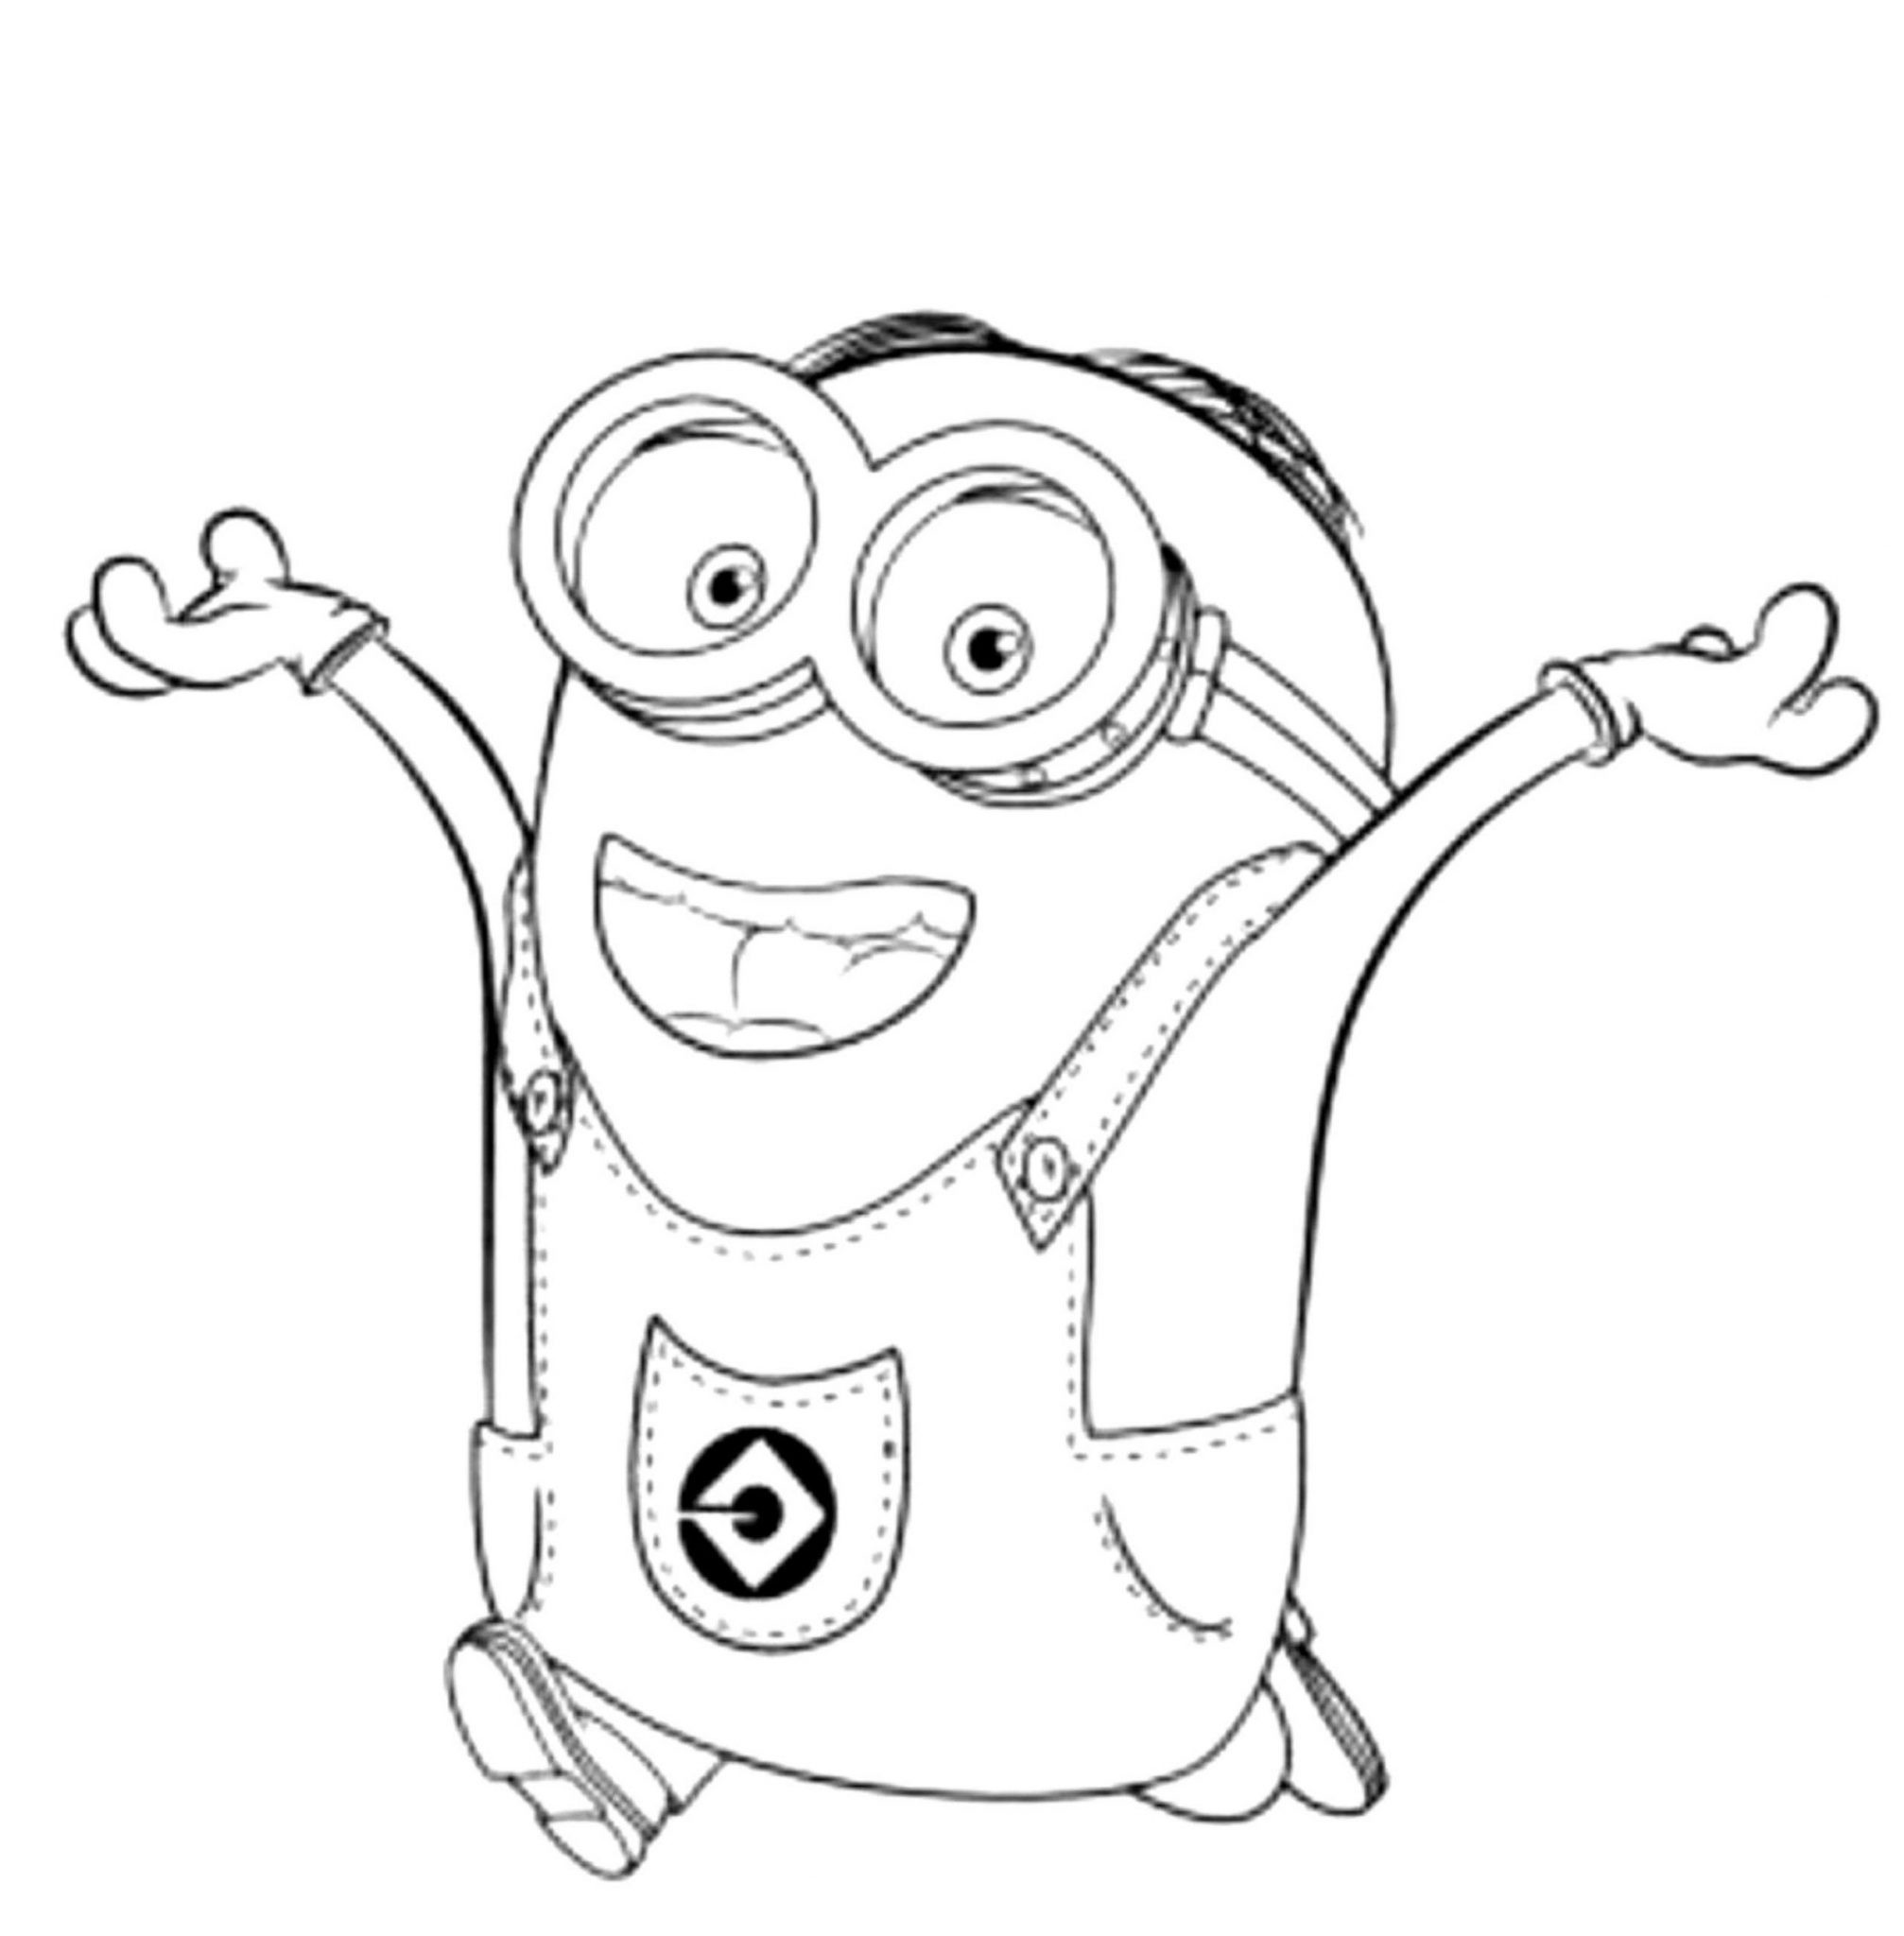 Free Printable Minion Coloring Pages
 Print & Download Minion Coloring Pages for Kids to Have